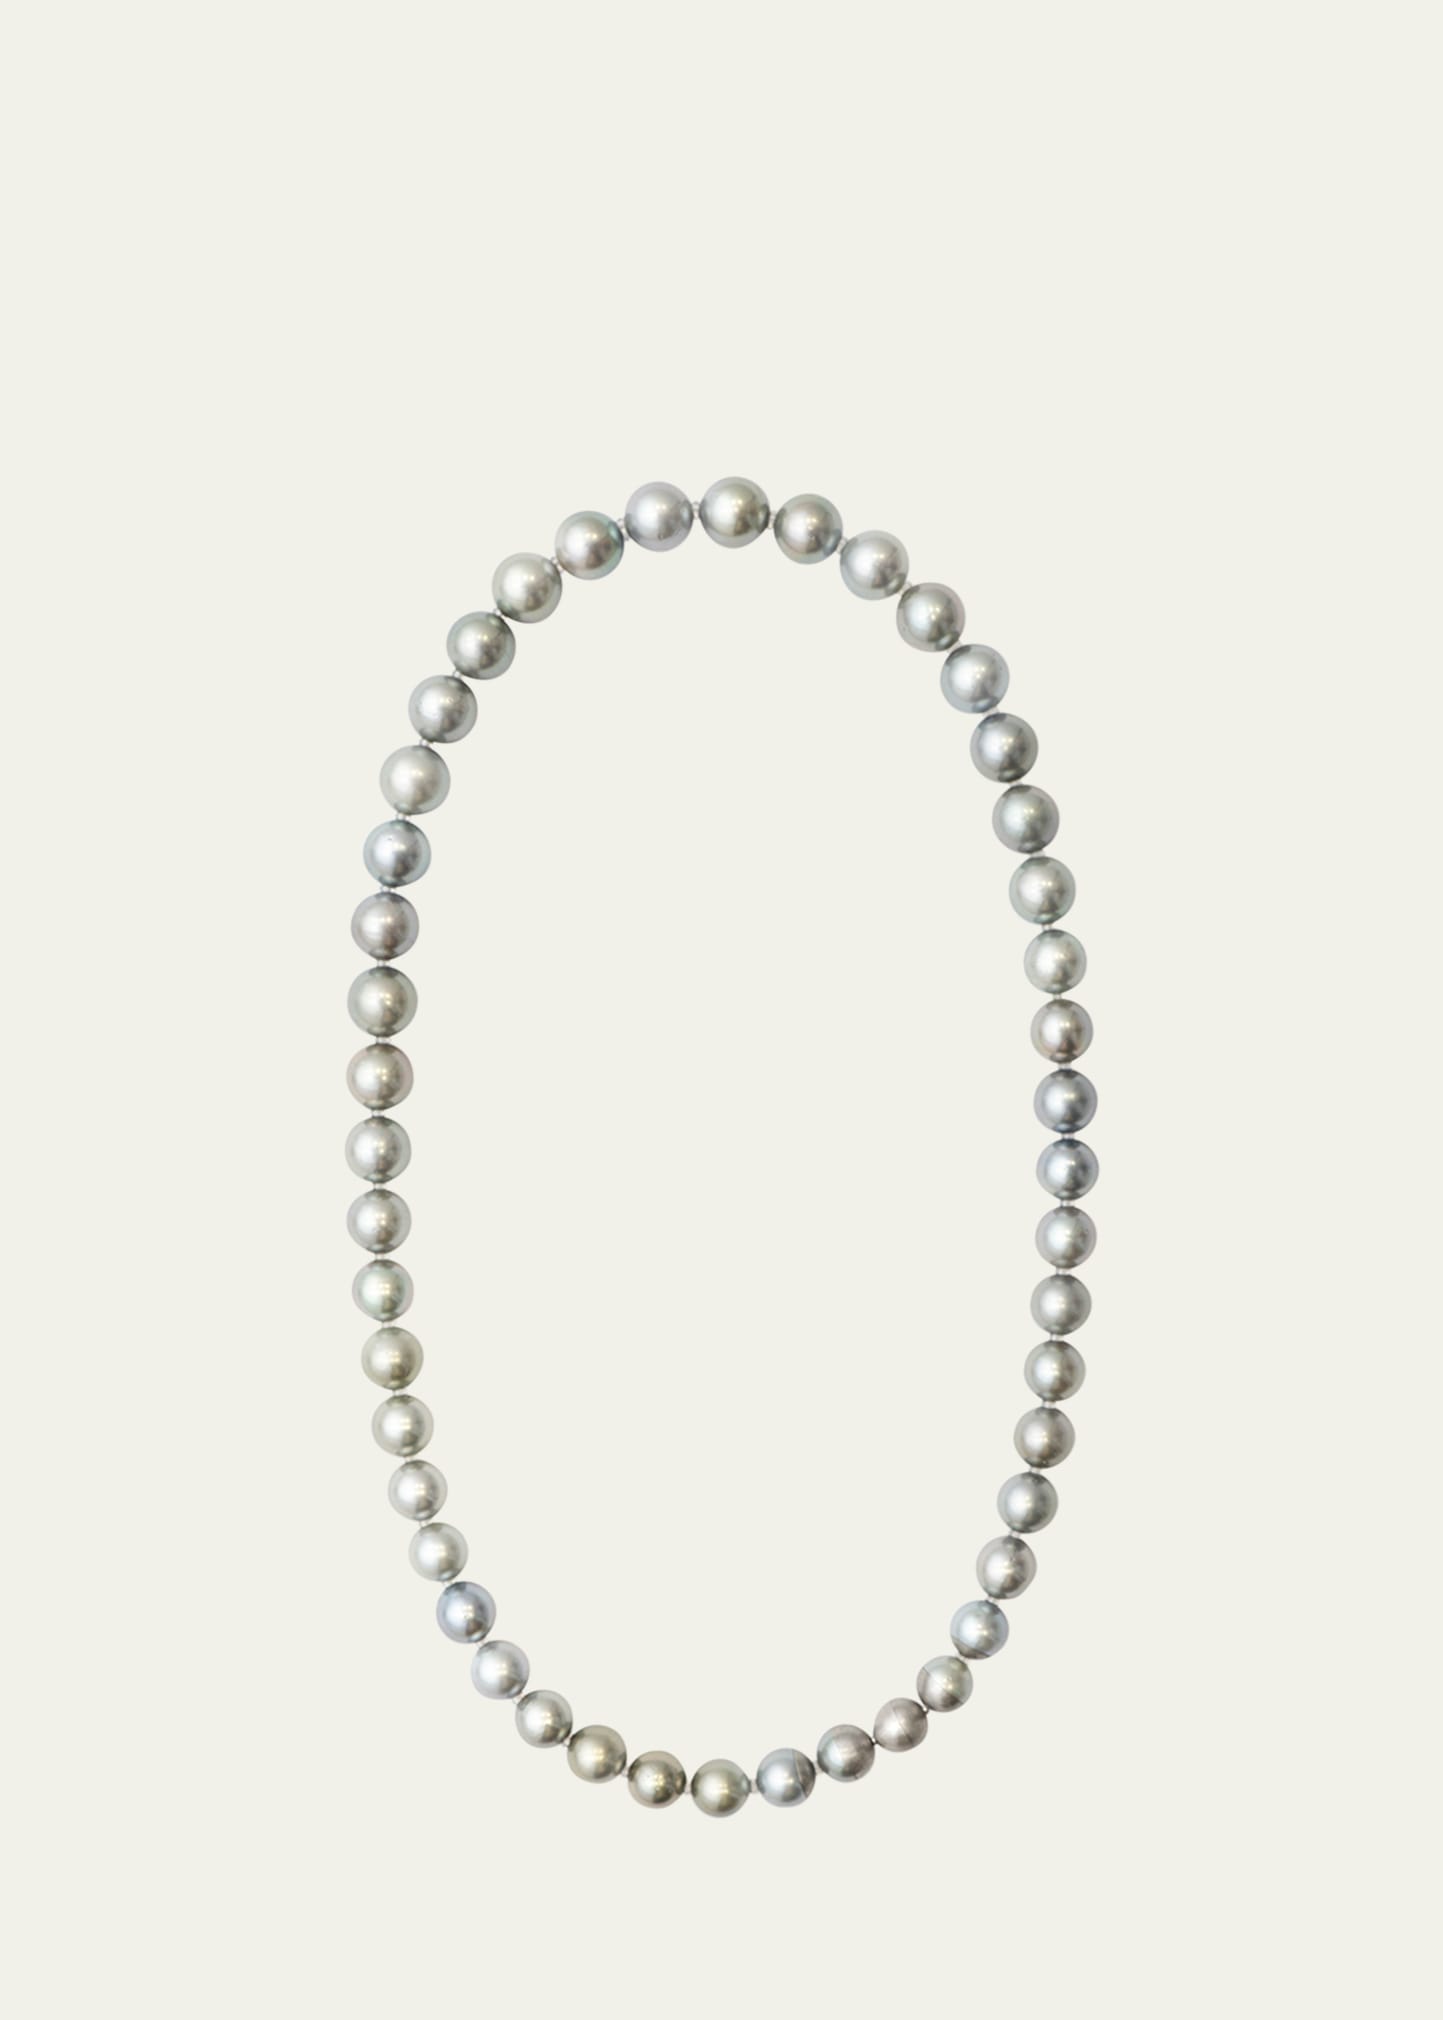 Platinum Sectional Pearl Necklace with Cultured Black Pearls